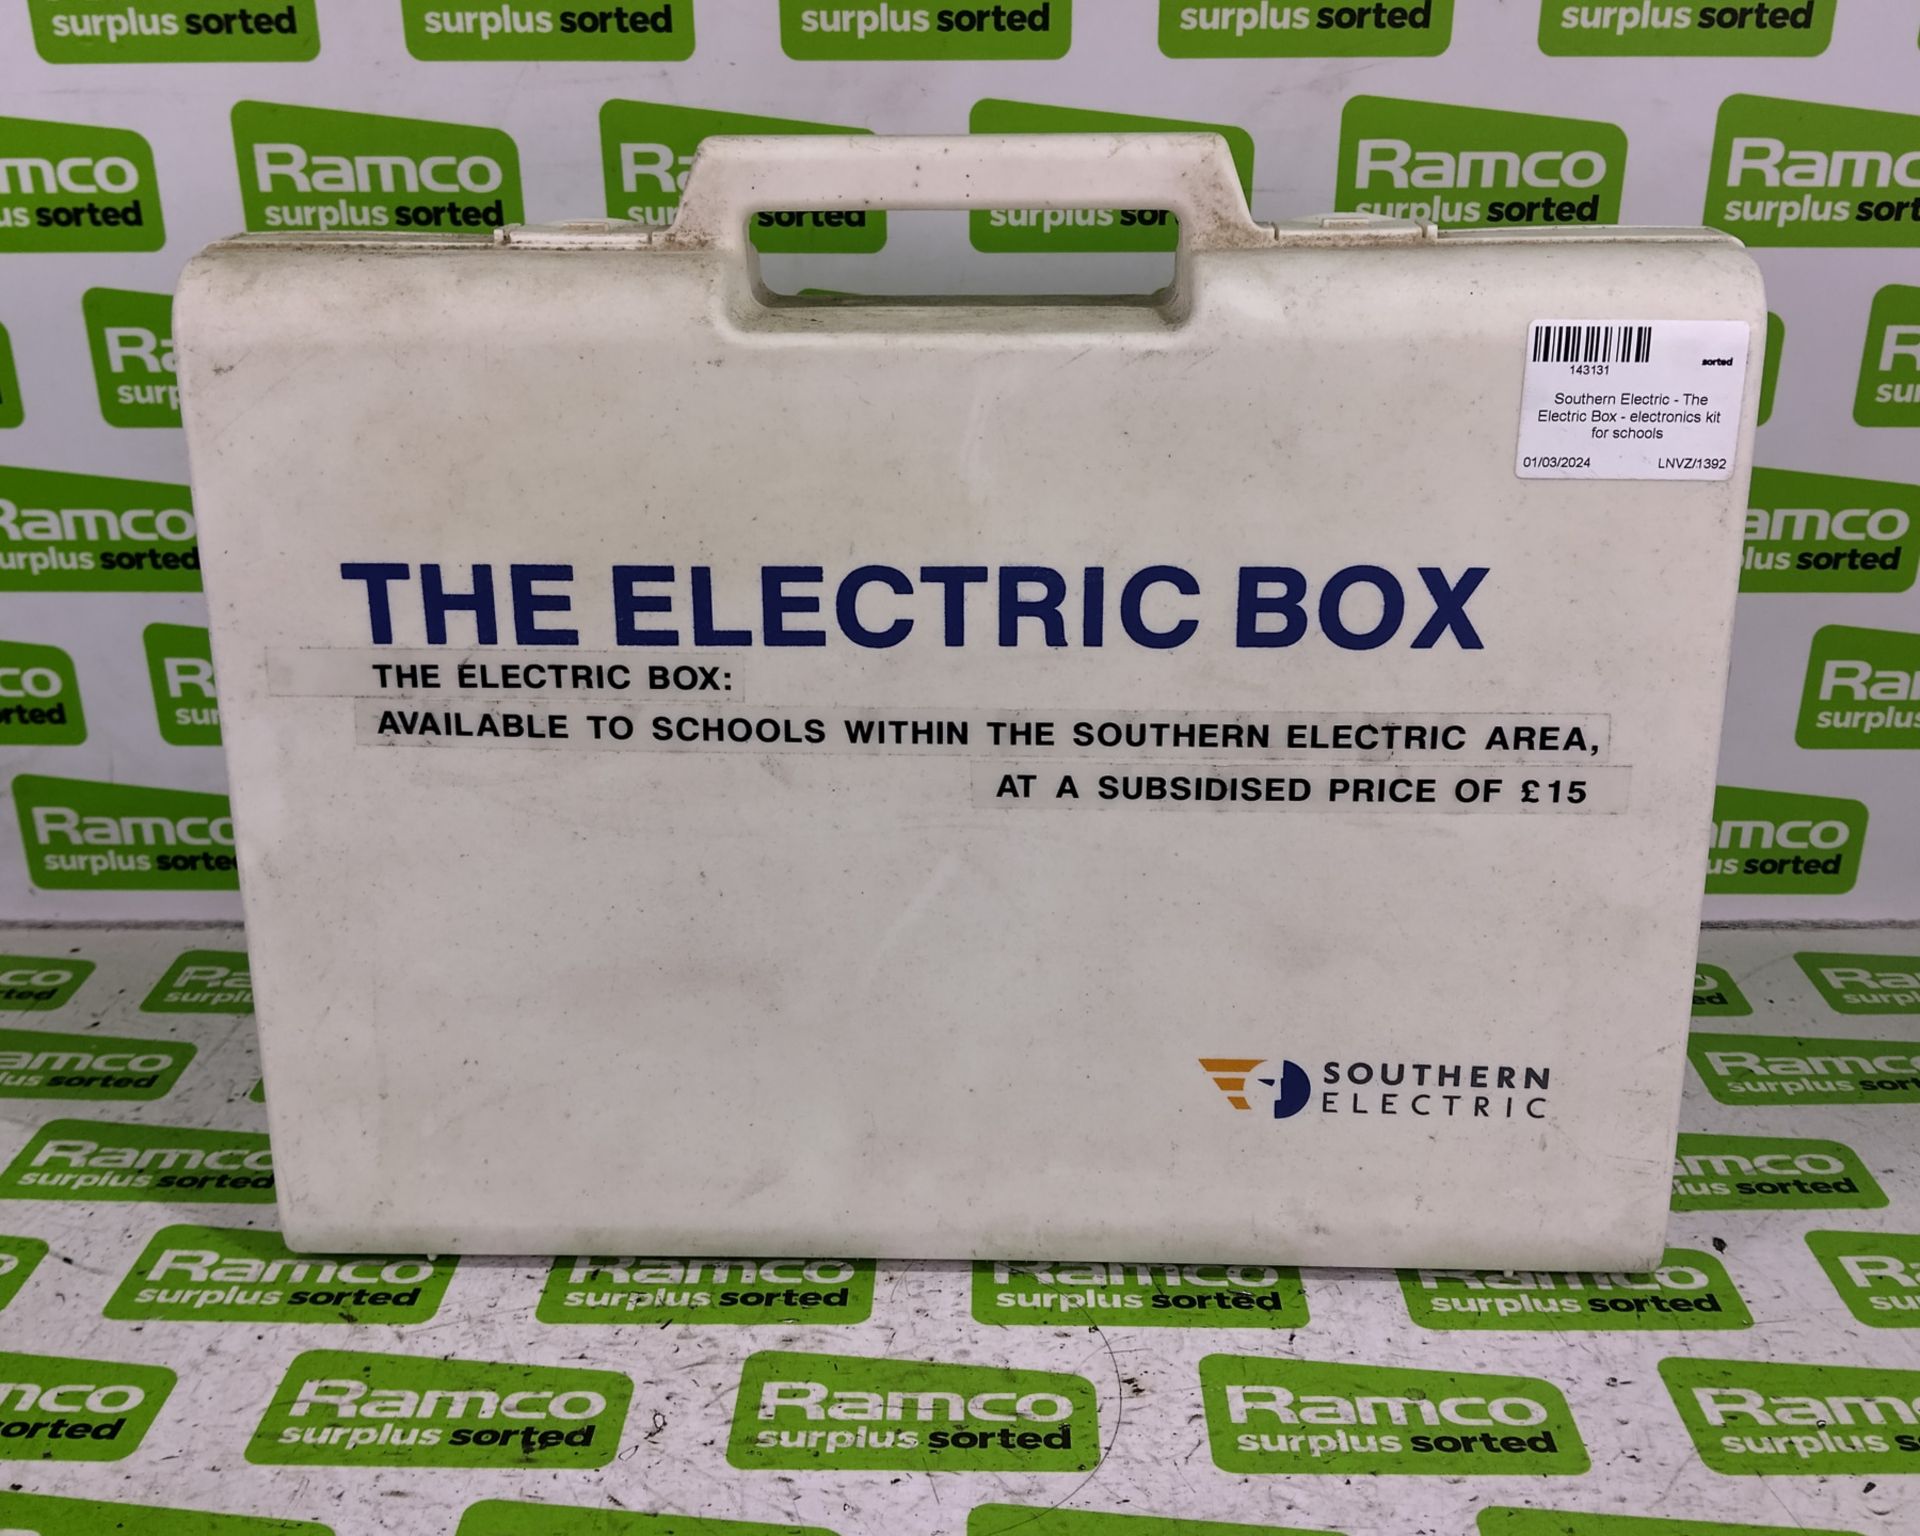 Southern Electric - The Electric Box - electronics kit for schools - Image 2 of 4